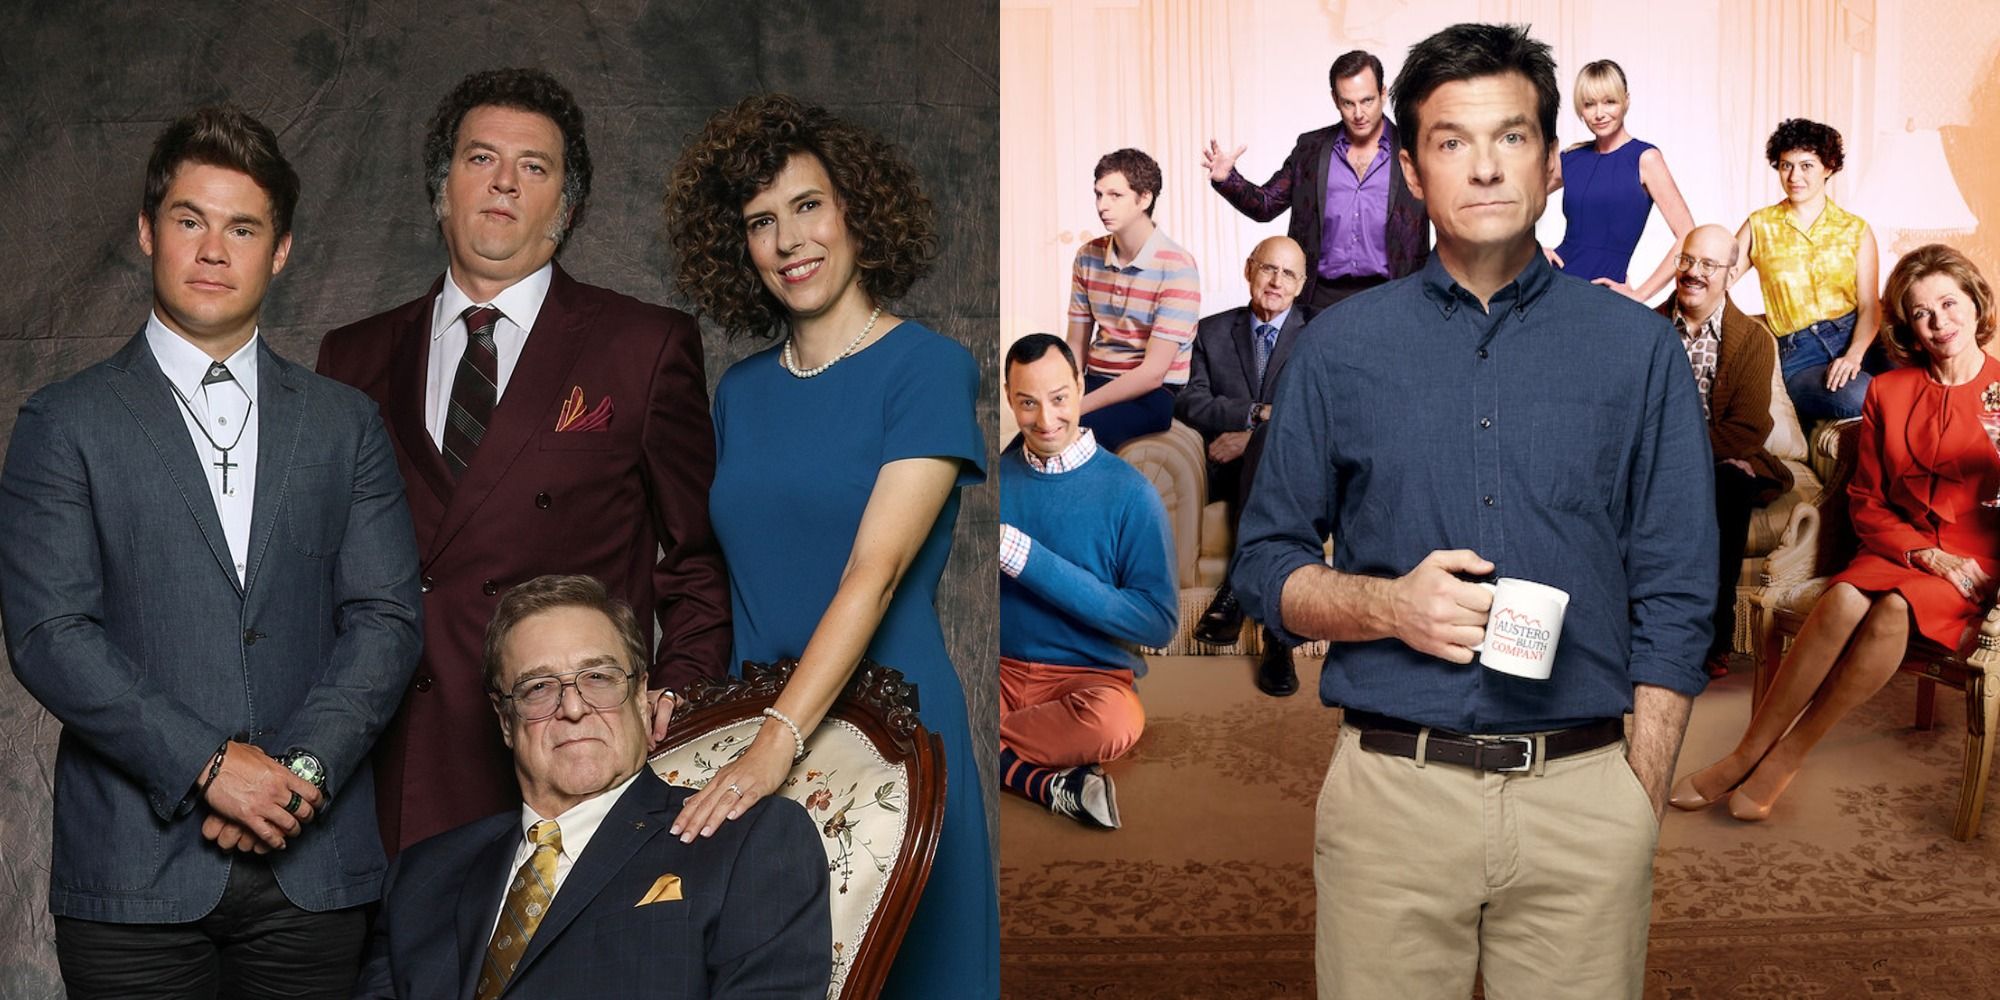 Split image showing the casts of The Righteous Gemstones and Arrested Development